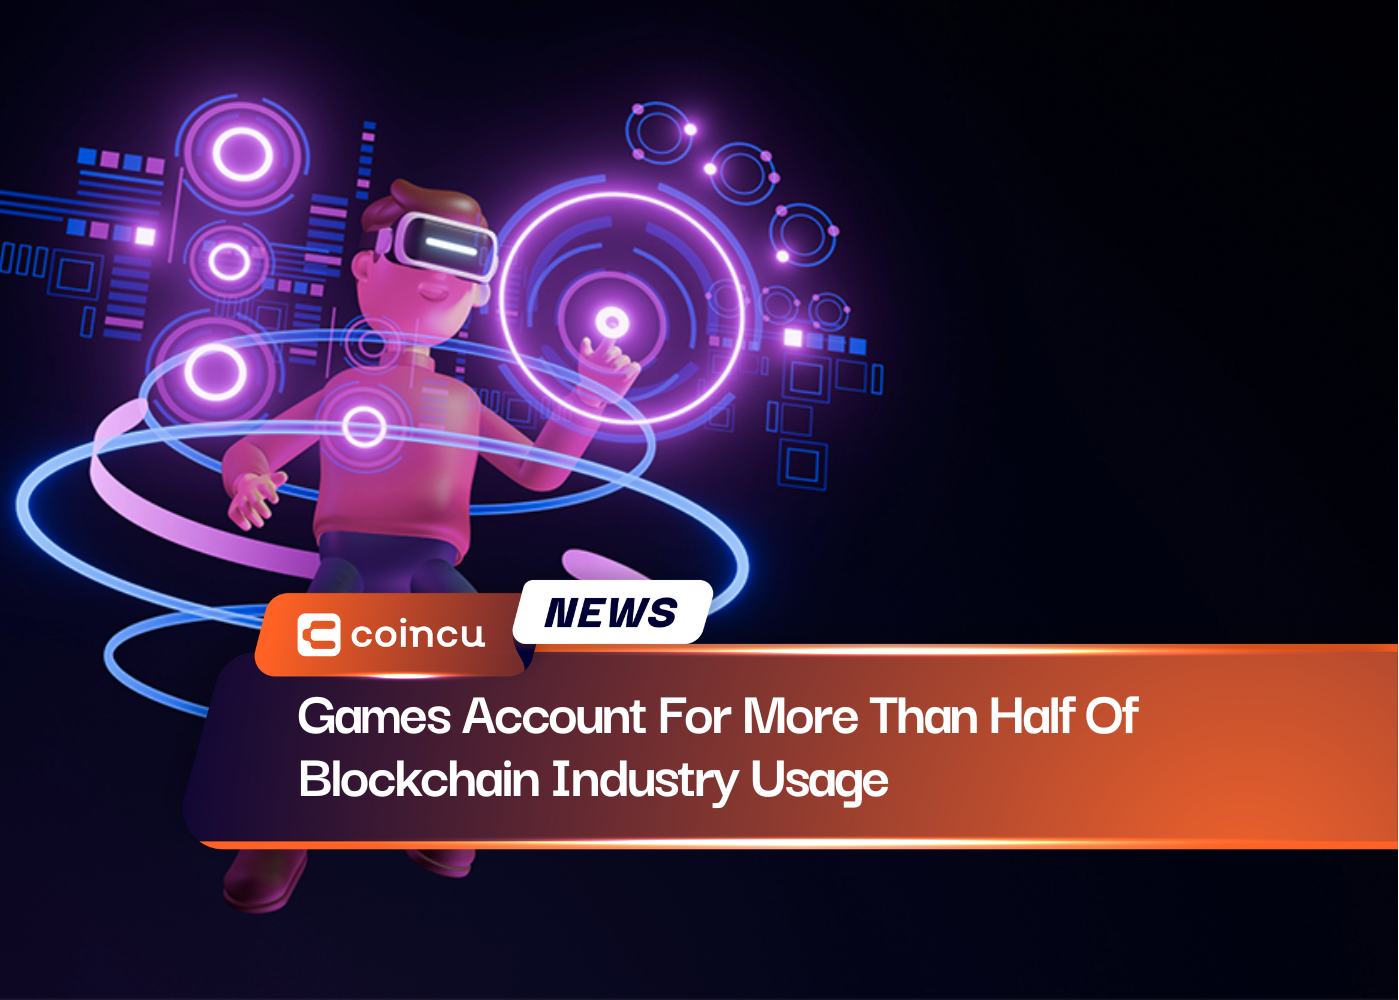 Games Account For More Than Half Of Blockchain Industry Usage